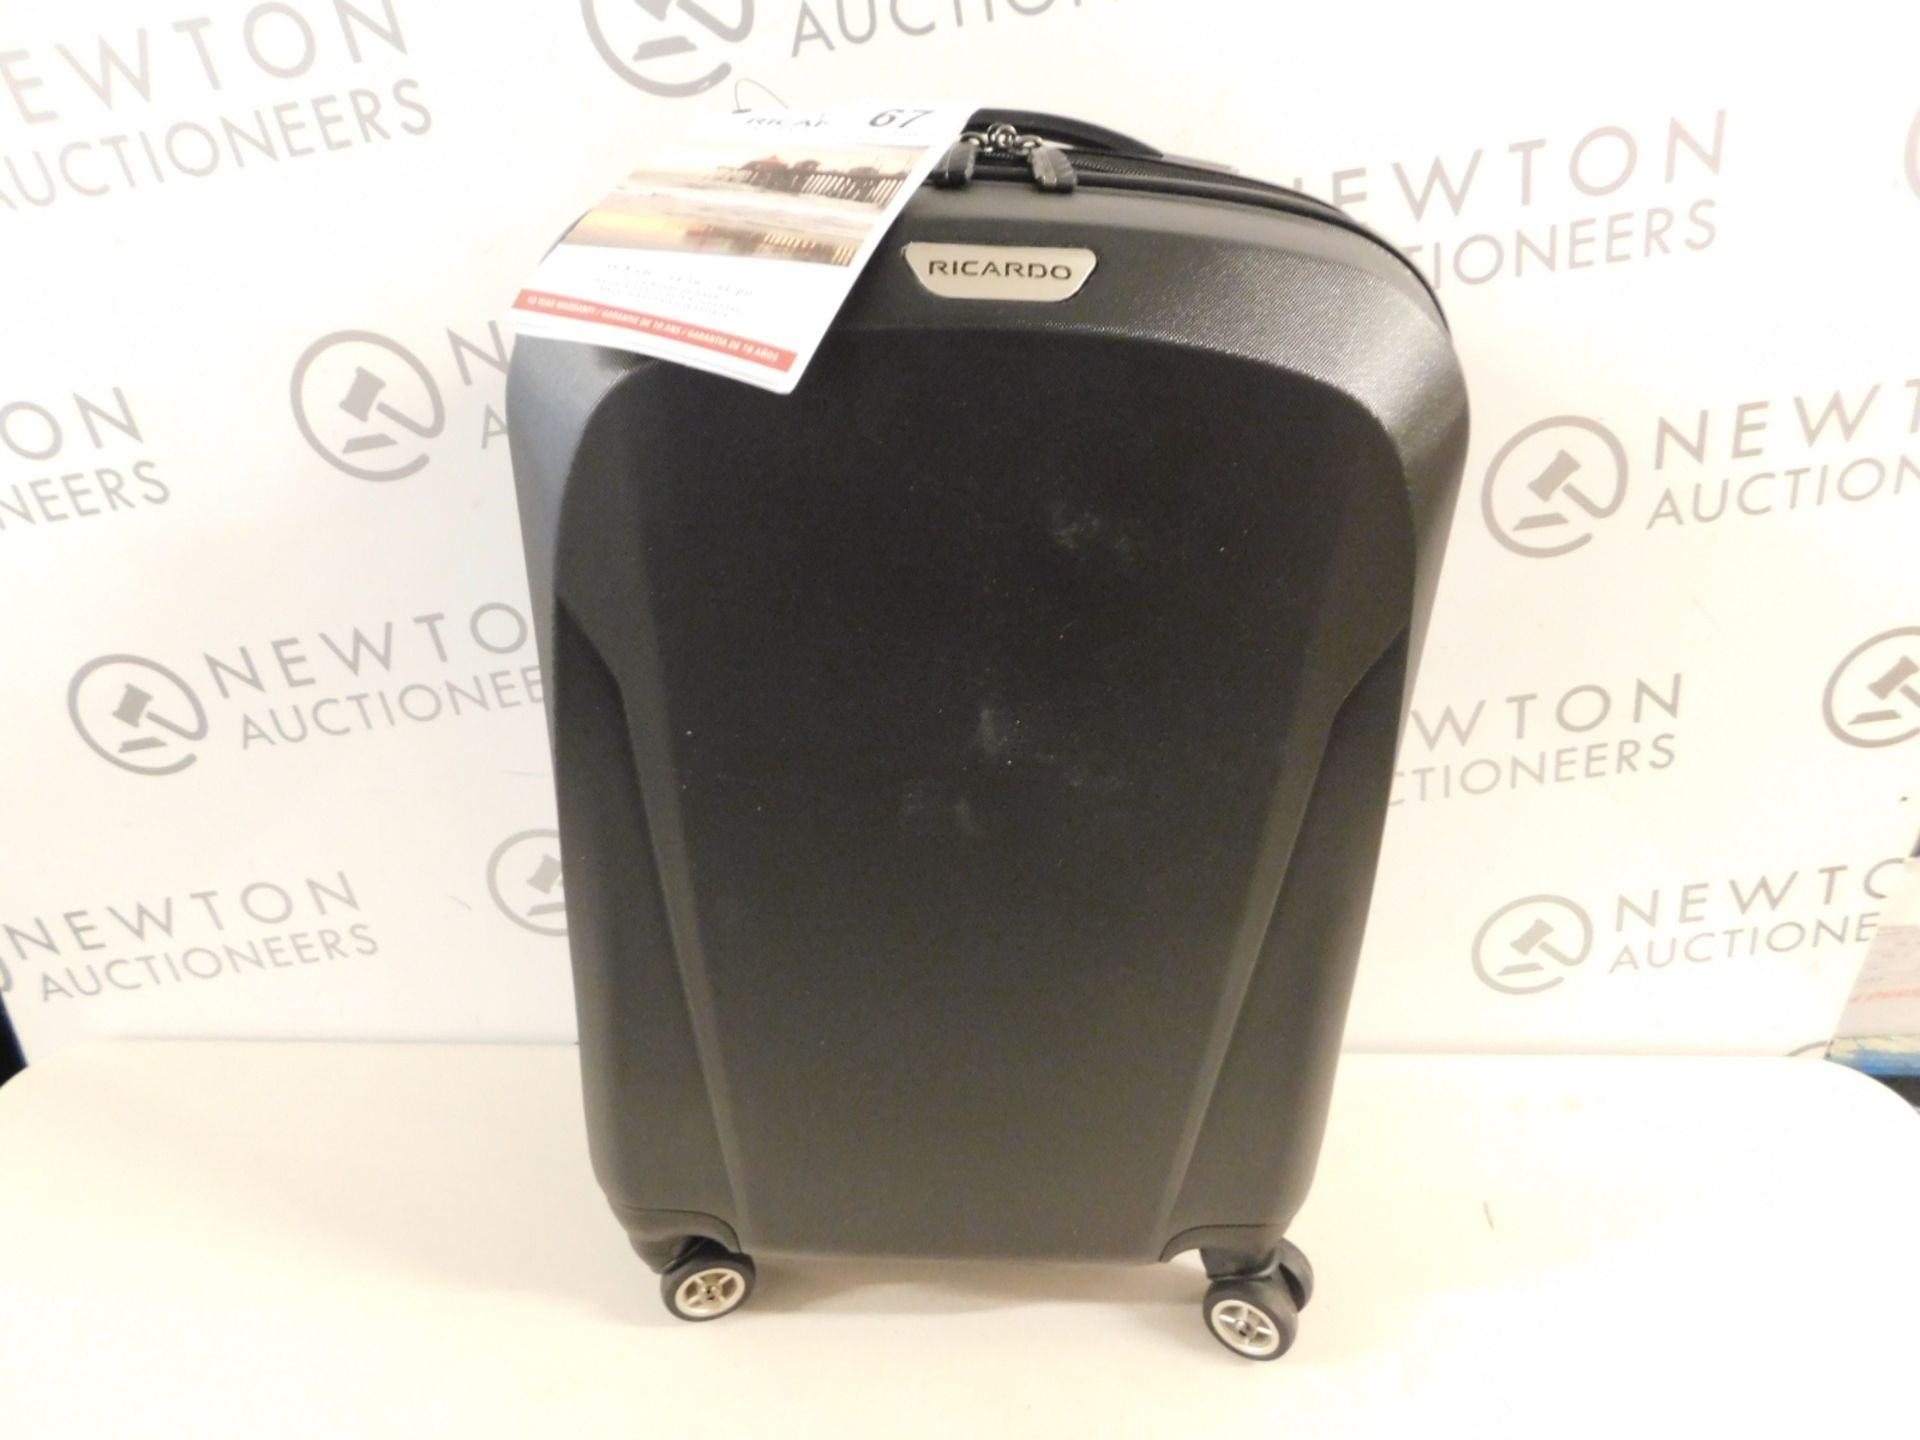 1 RICARDO BEVERLY HILLS 55.8CM/ 22" POLYCARBONATE HAND LUGGAGE RRP £79.99 (EXCELLENT CONDITION)